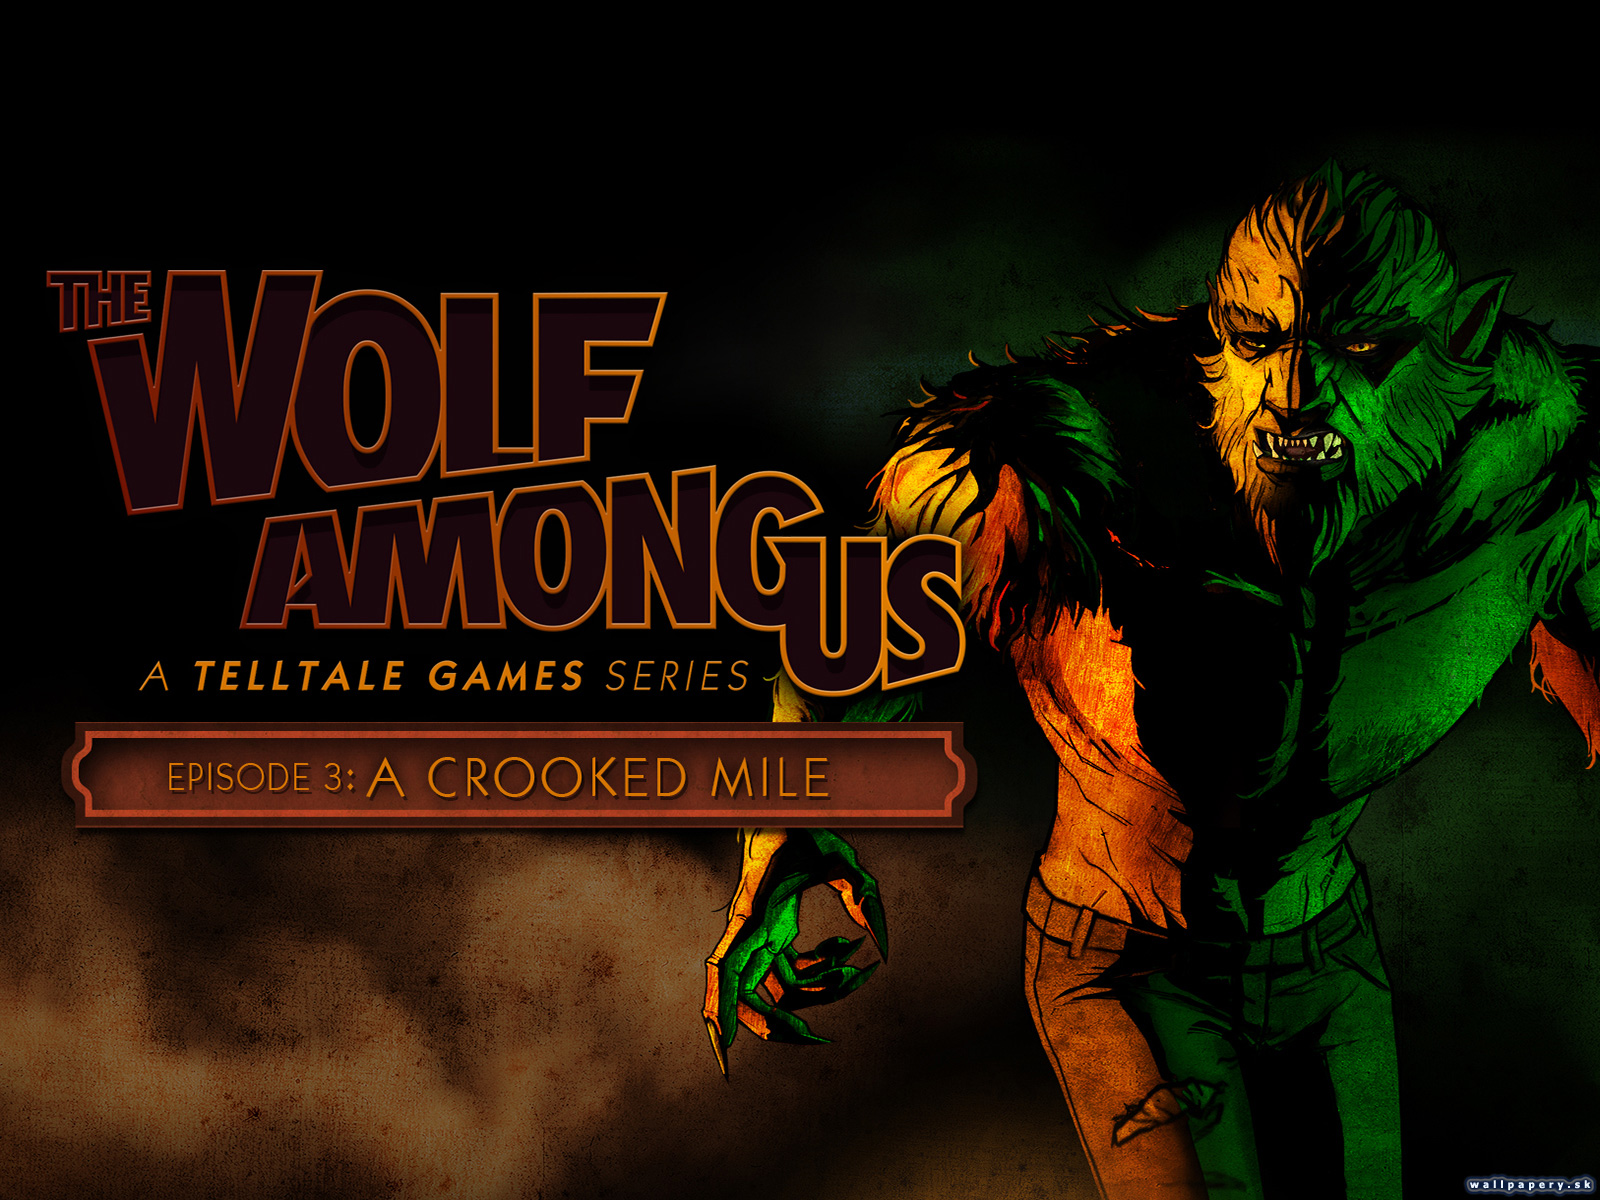 The Wolf Among Us - Episode 3: A Crooked Mile - wallpaper 1